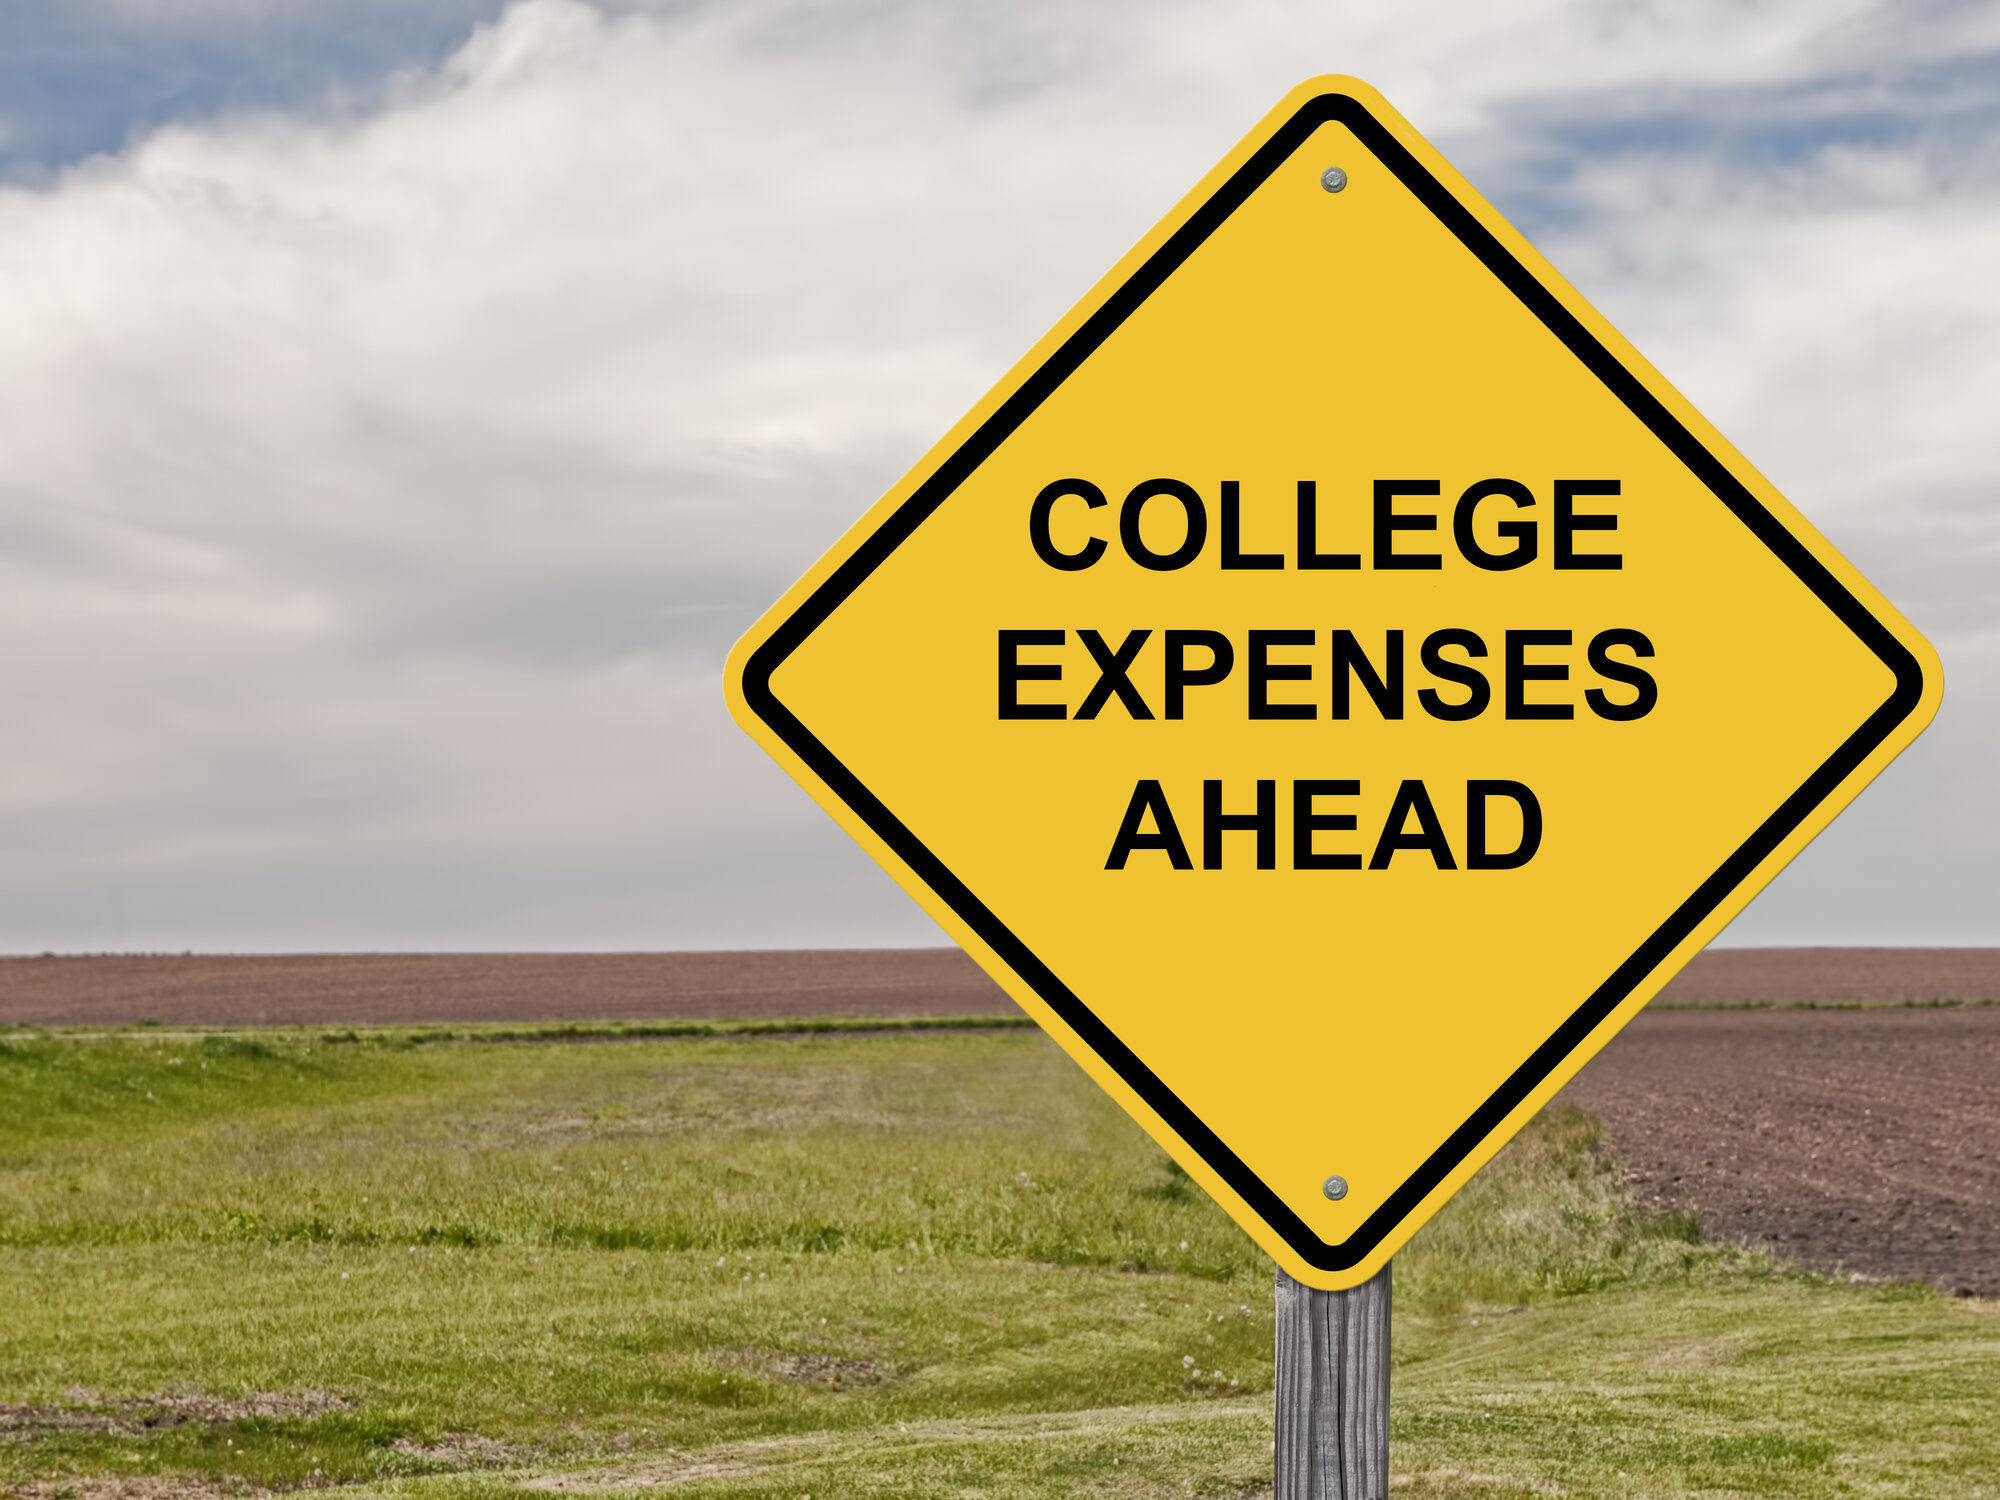 financial planning for college